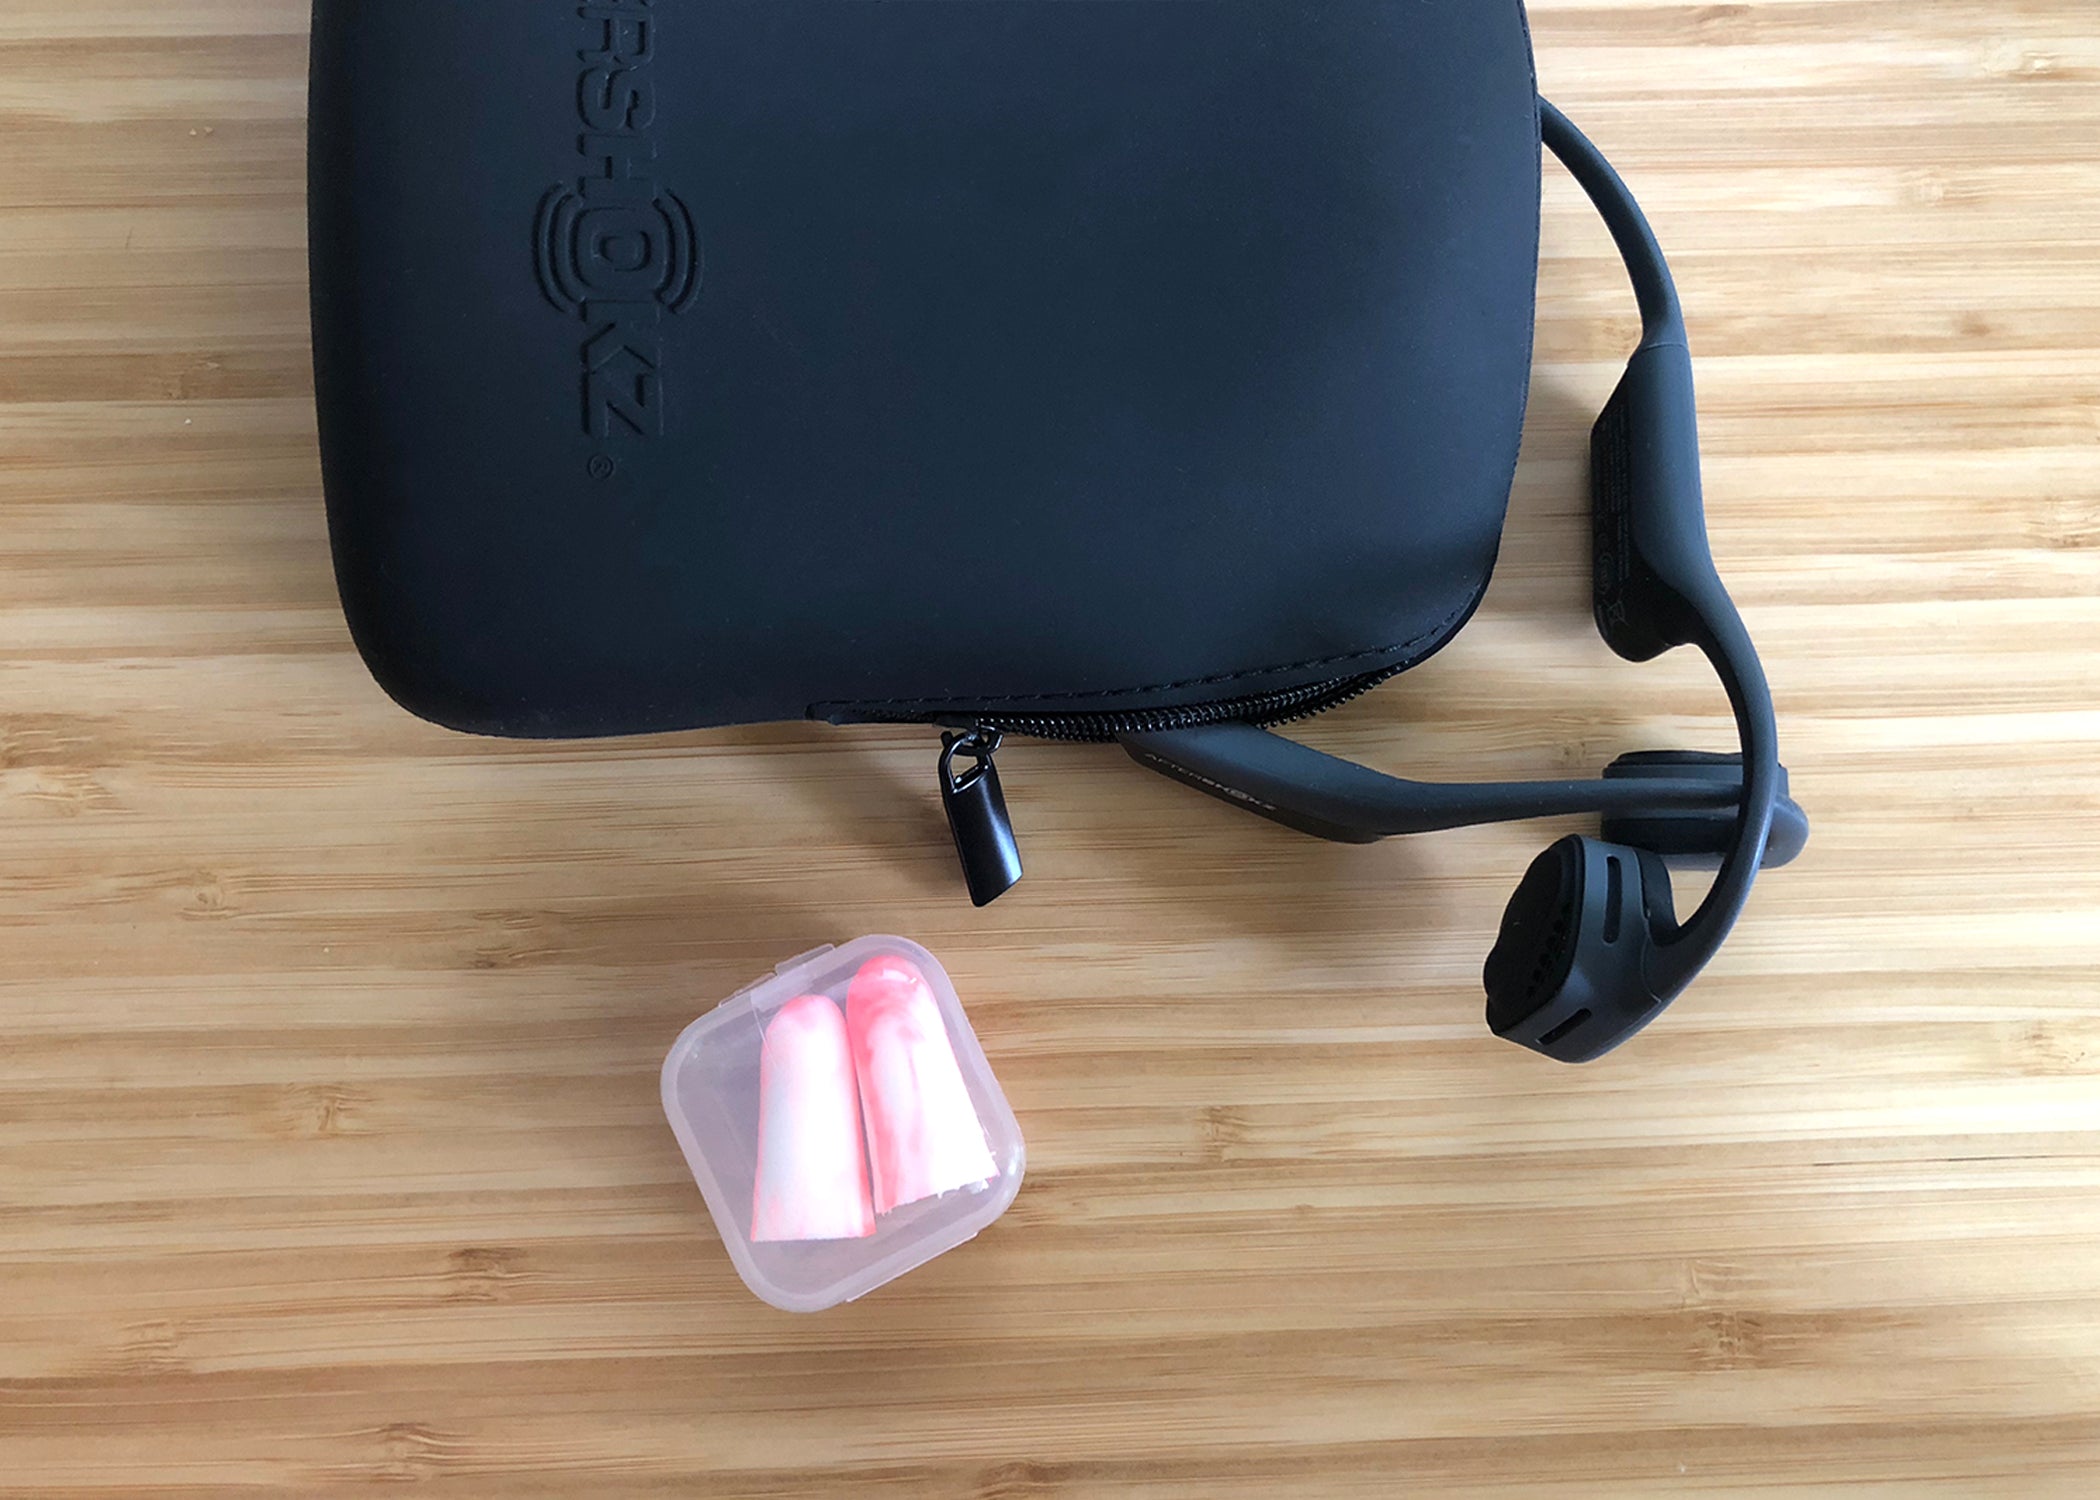 How to Use AfterShokz with Earplugs